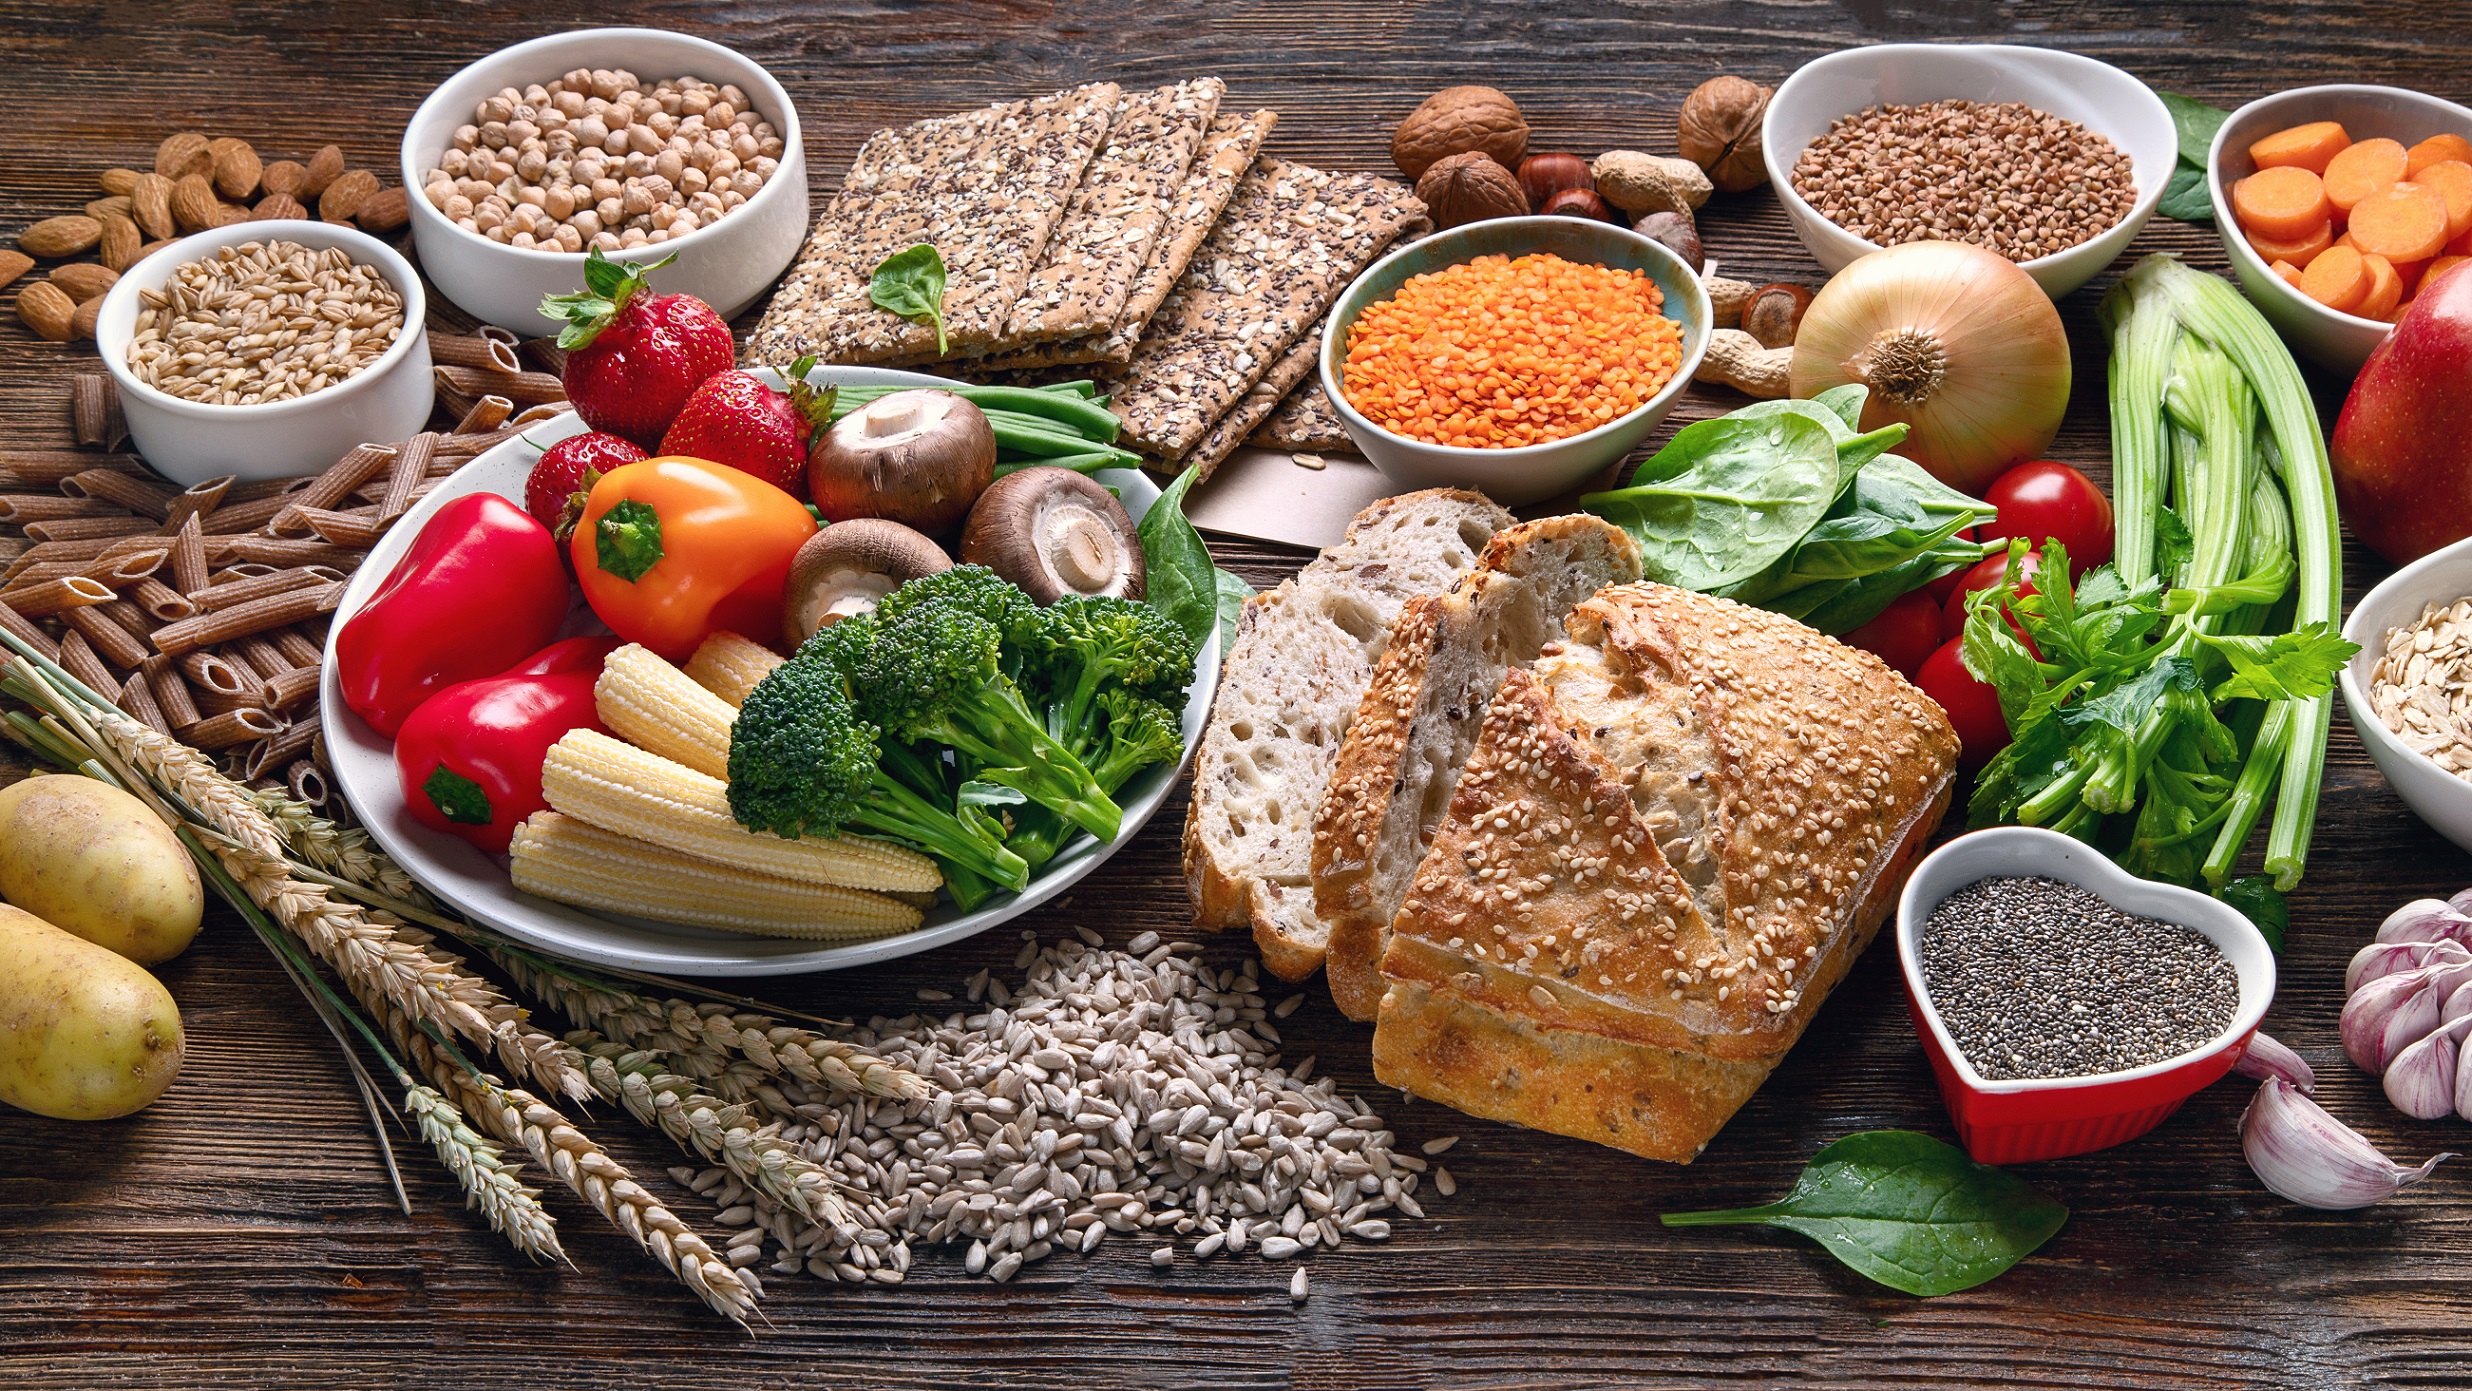 Losing weight with a high-carbohydrate diet?